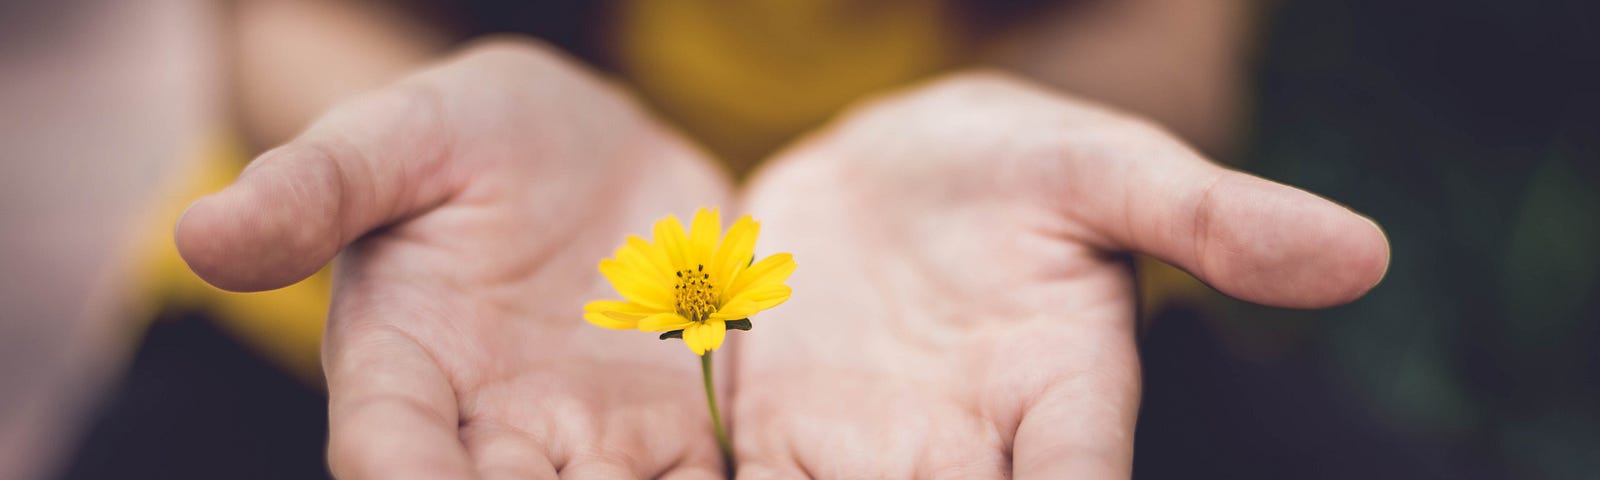 Girl holding a yellow flower on the palm of her hands.